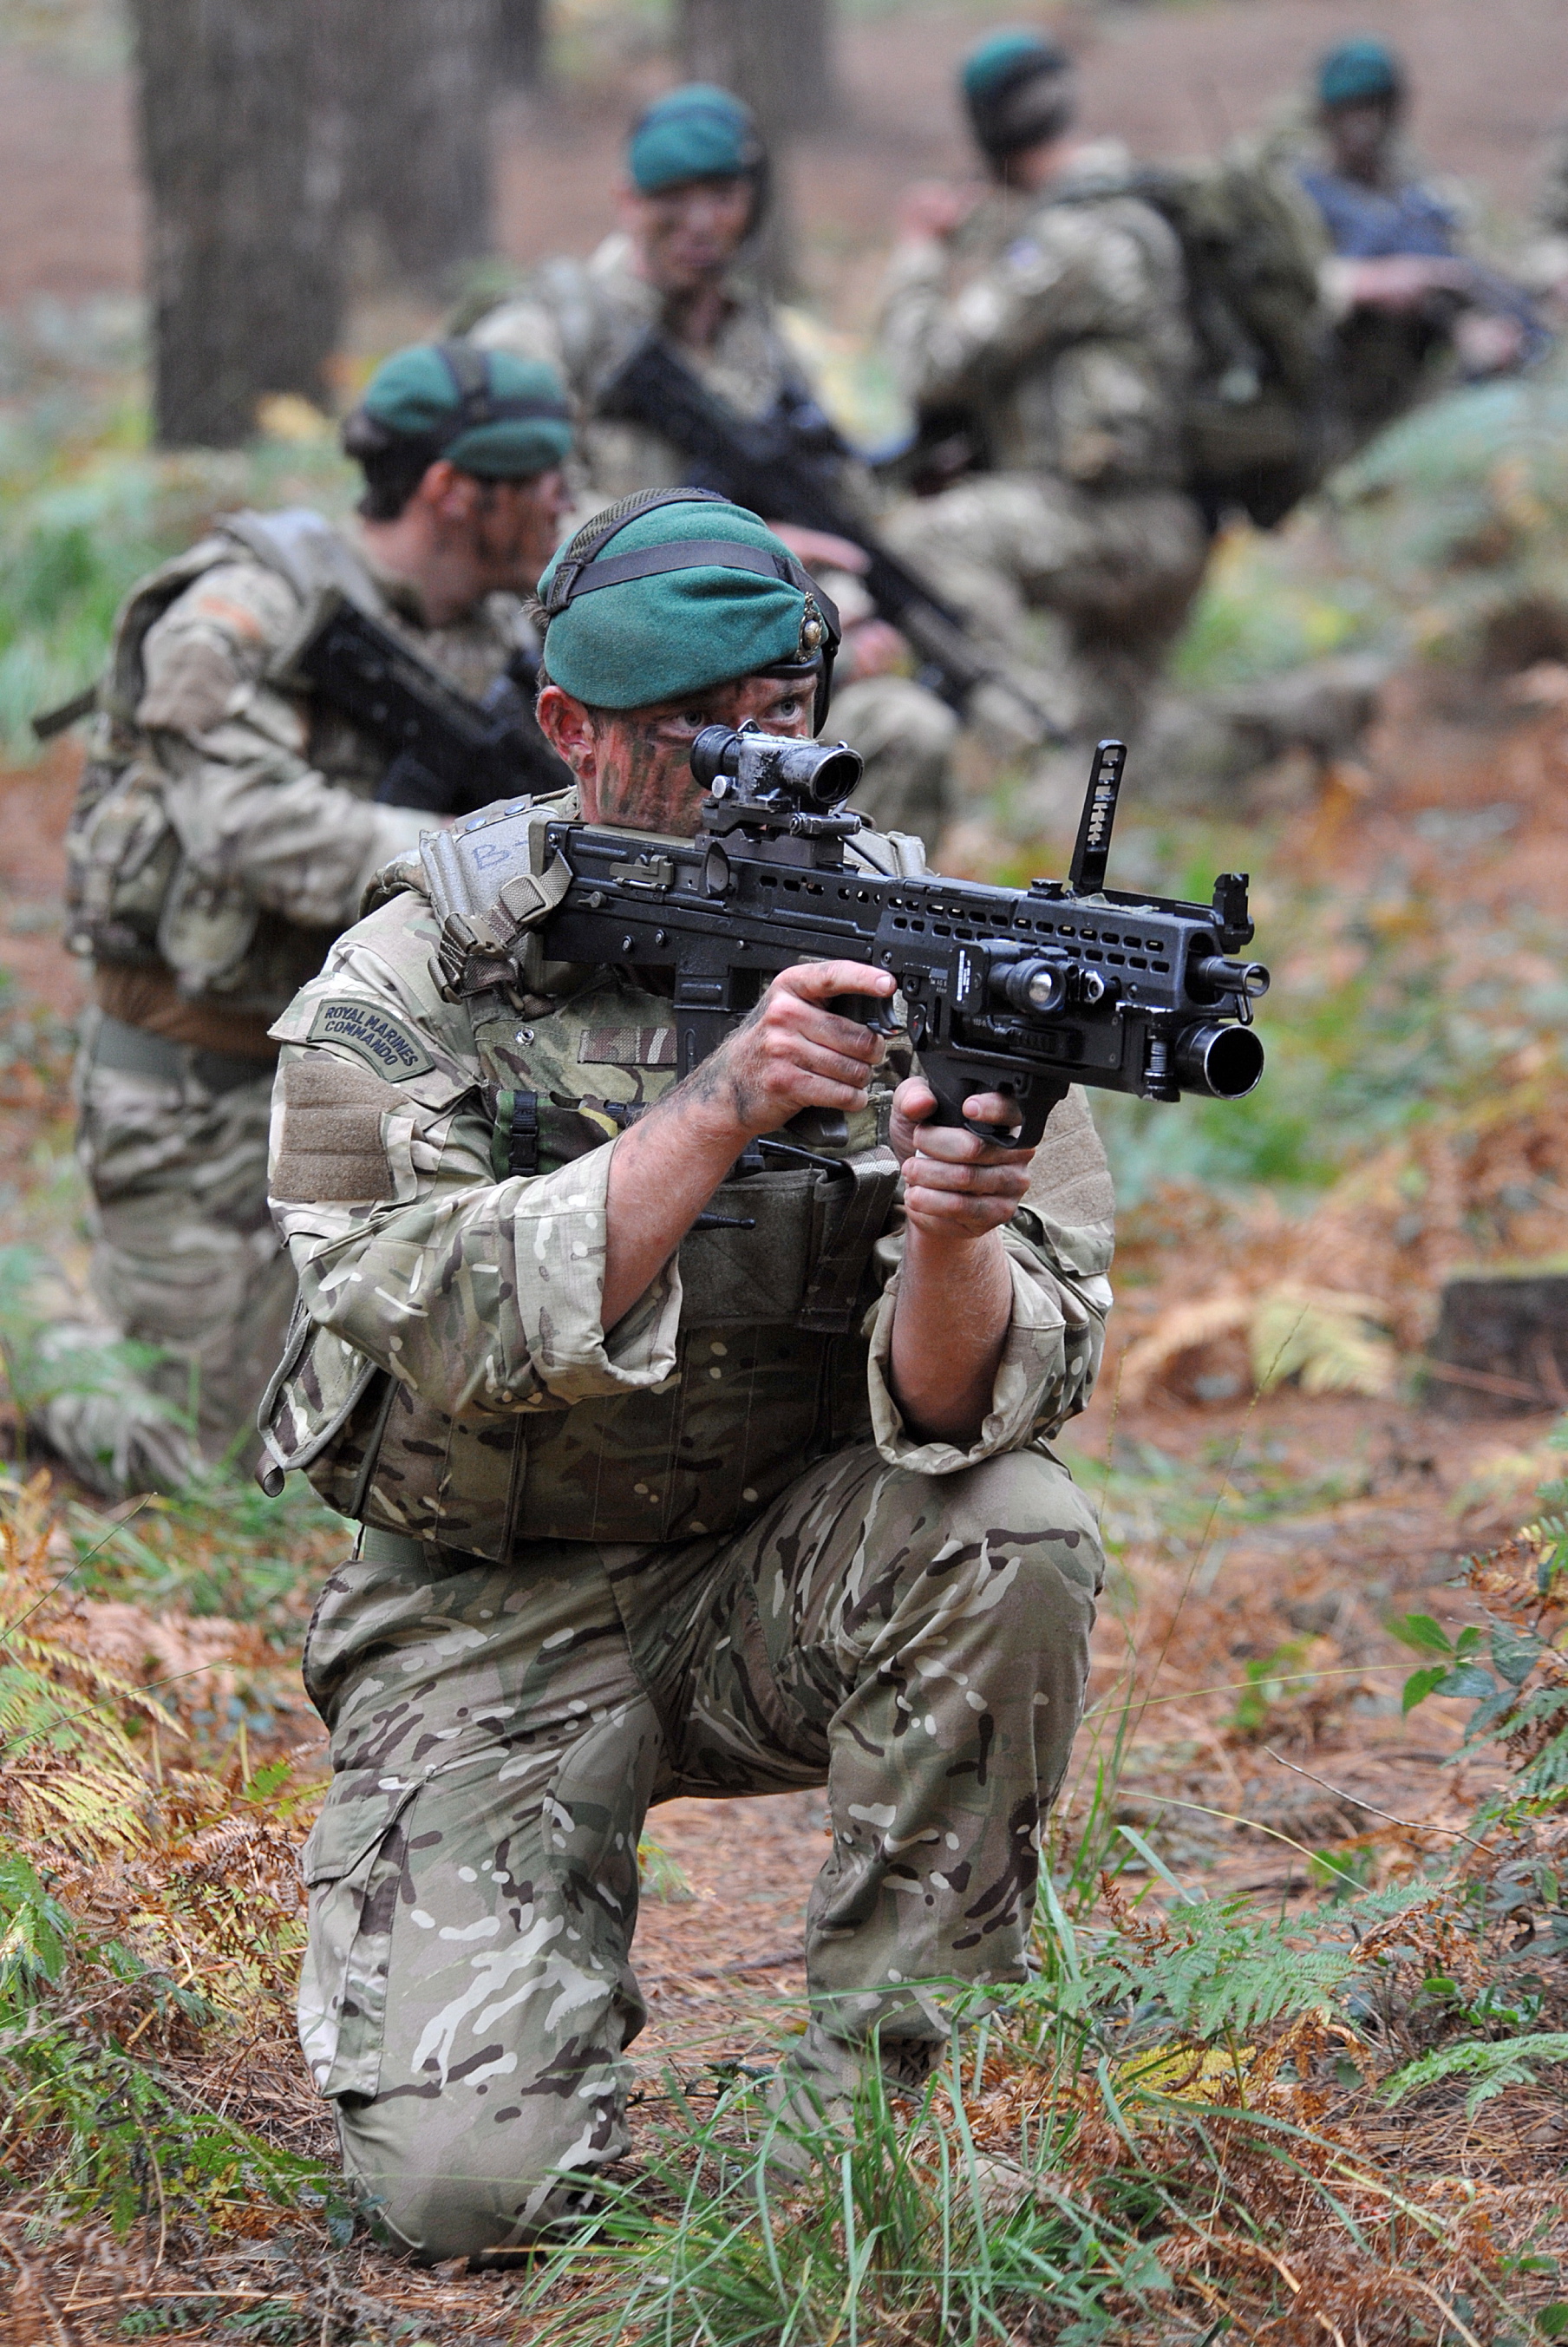 Royal Marine Commandos are pictured during a Green Ops exercise conducted over a two day period in various areas around Woodbury Common and Tregantle Ranges in Devon. UK MoD Photo 